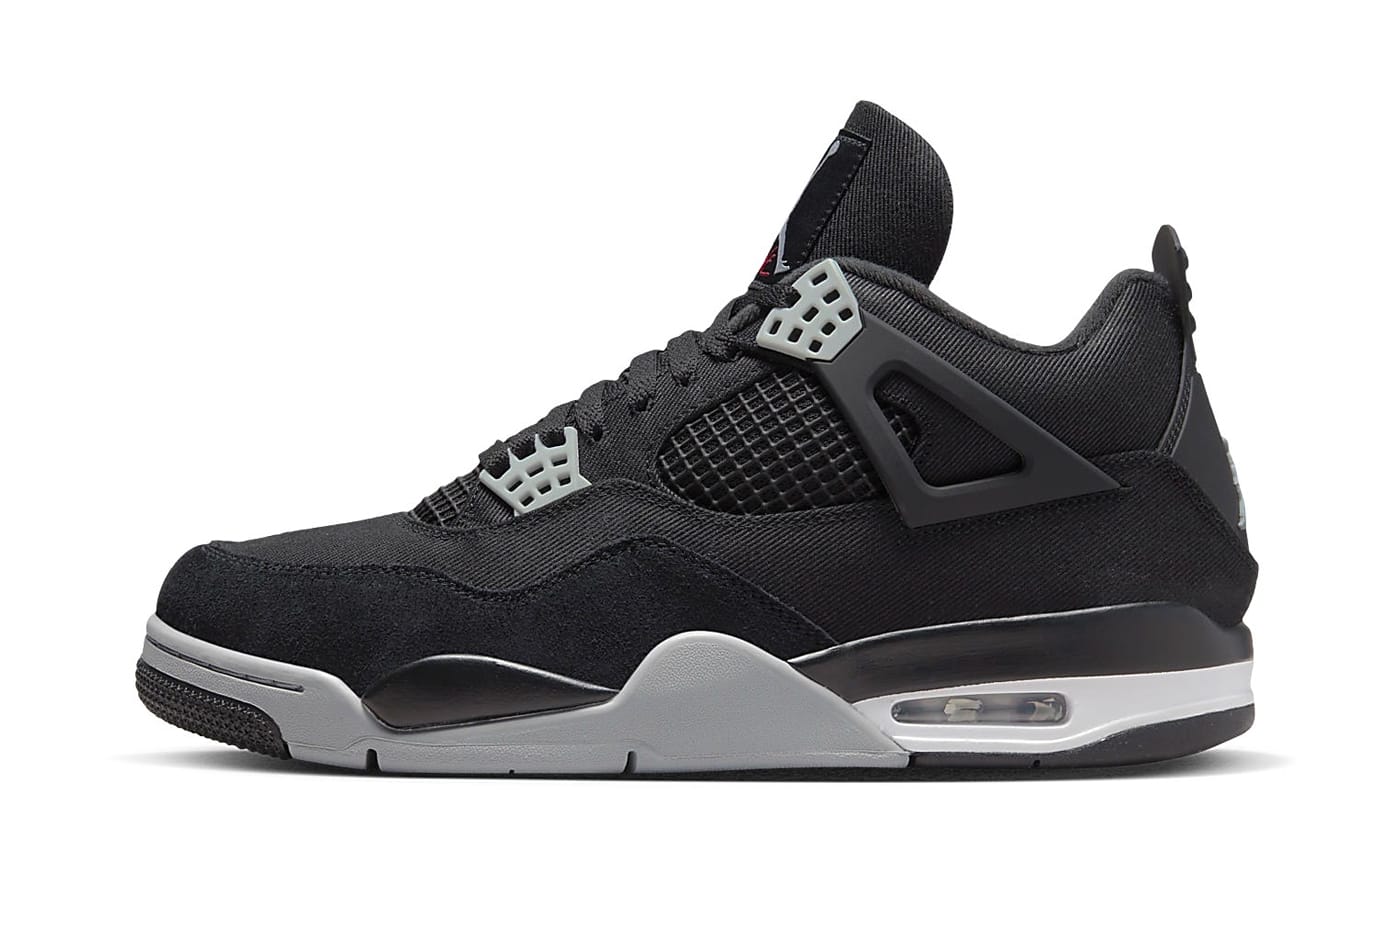 Official Images of the Air Jordan 4 “Military Black” | Hypebeast